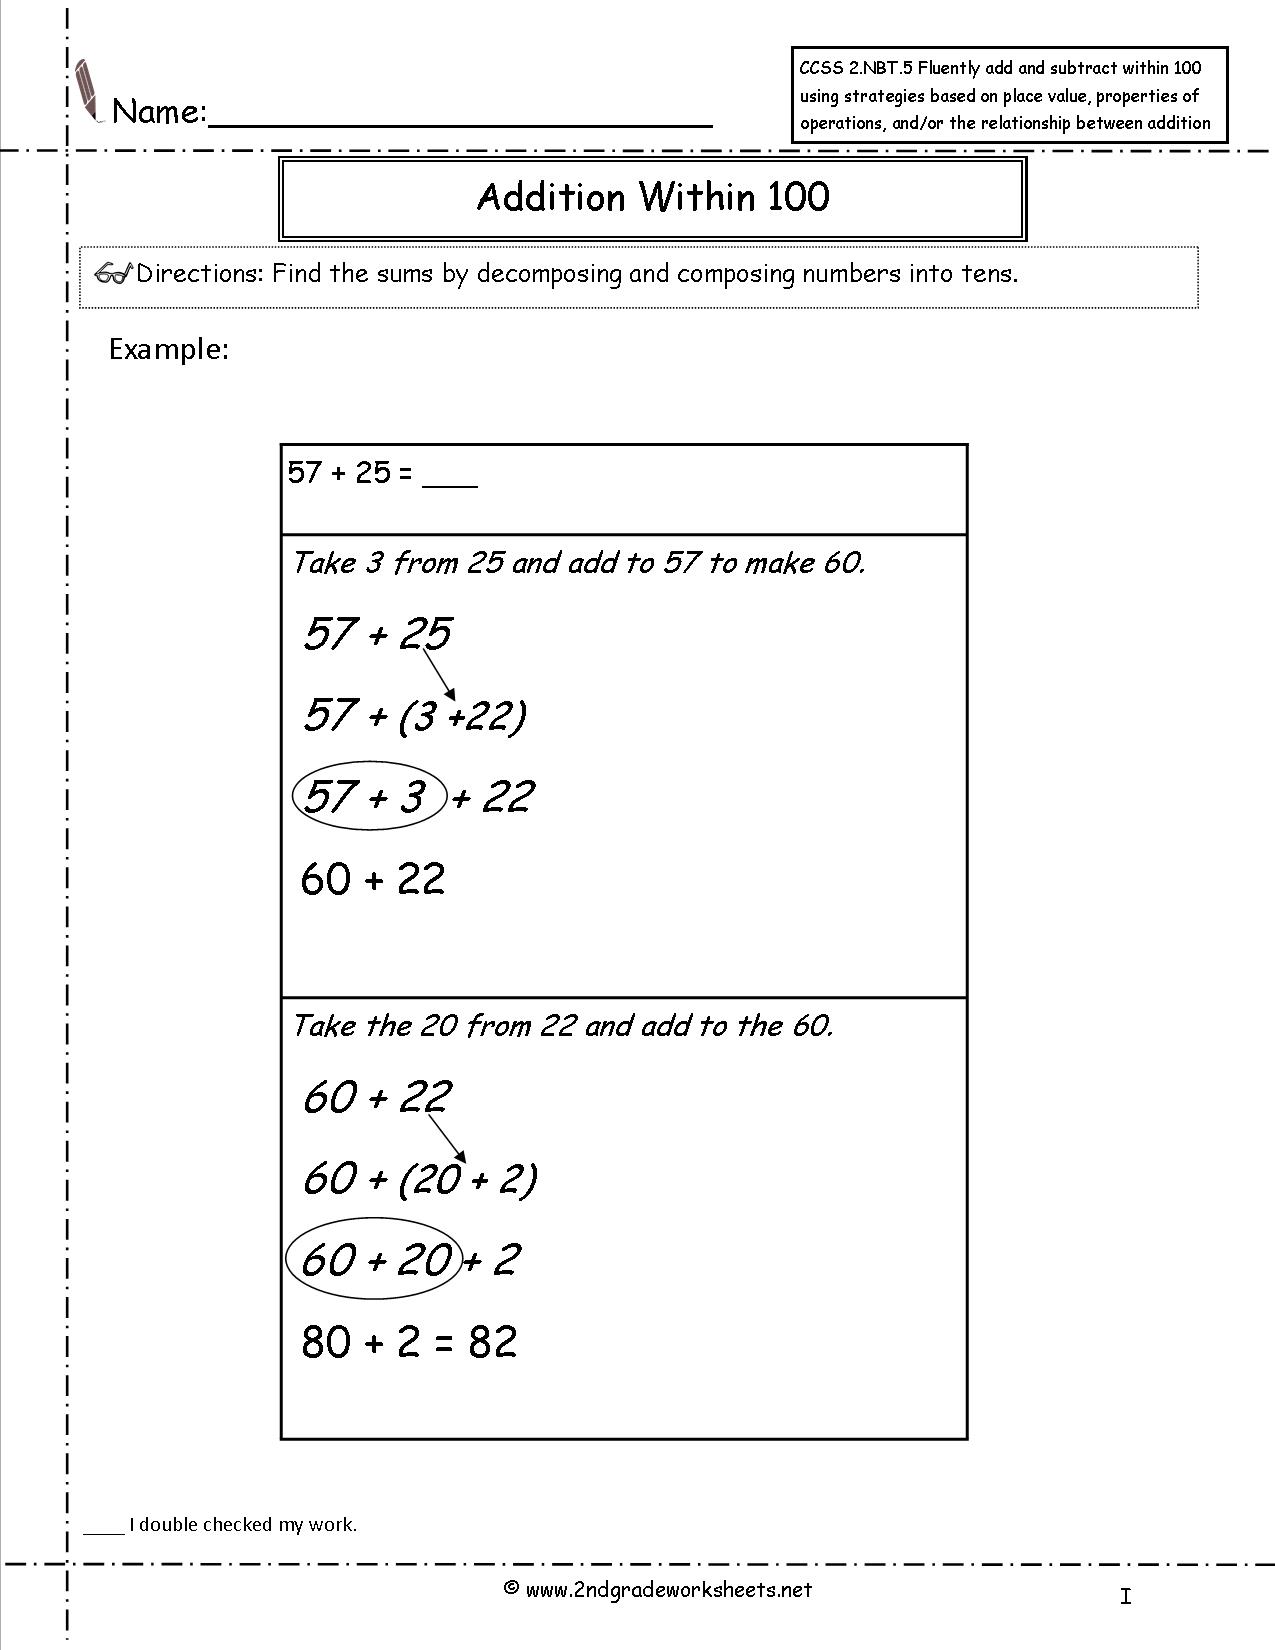 printables-common-core-grade-5-math-worksheets-tempojs-thousands-of-printable-activities